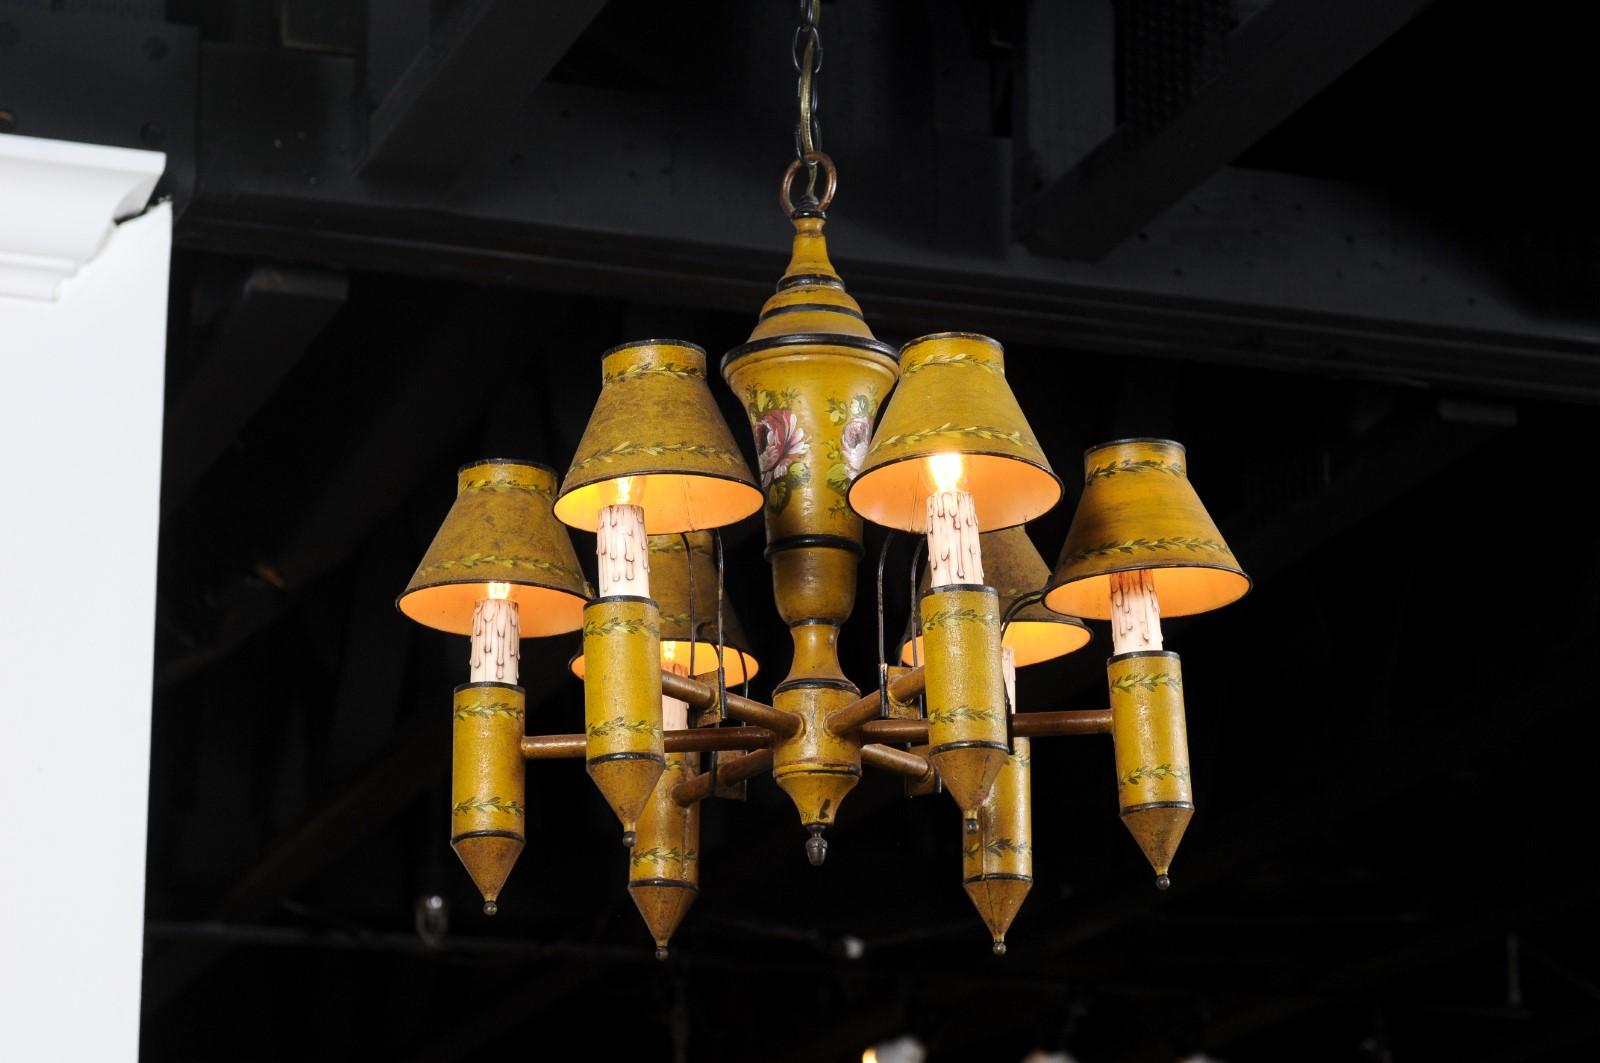 A French yellow tôle six-light chandelier from the 19th century, with hand painted floral décor. Born in France during the 19th century, this chandelier features a yellow-painted tôle structure, accented with black details and delicate floral